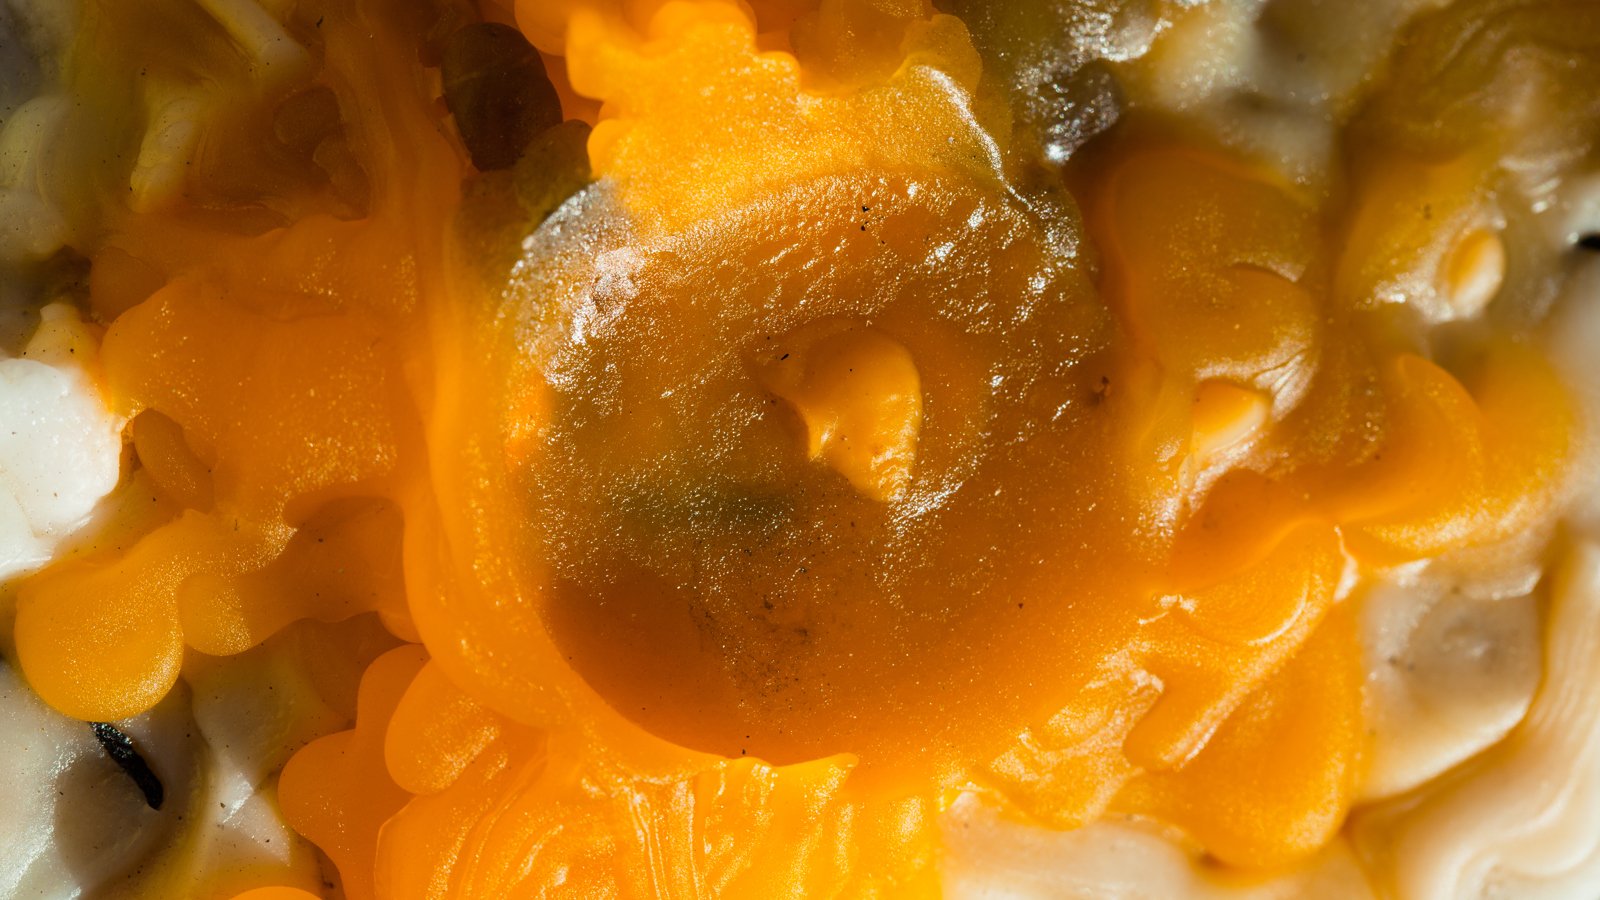 Wax Formations